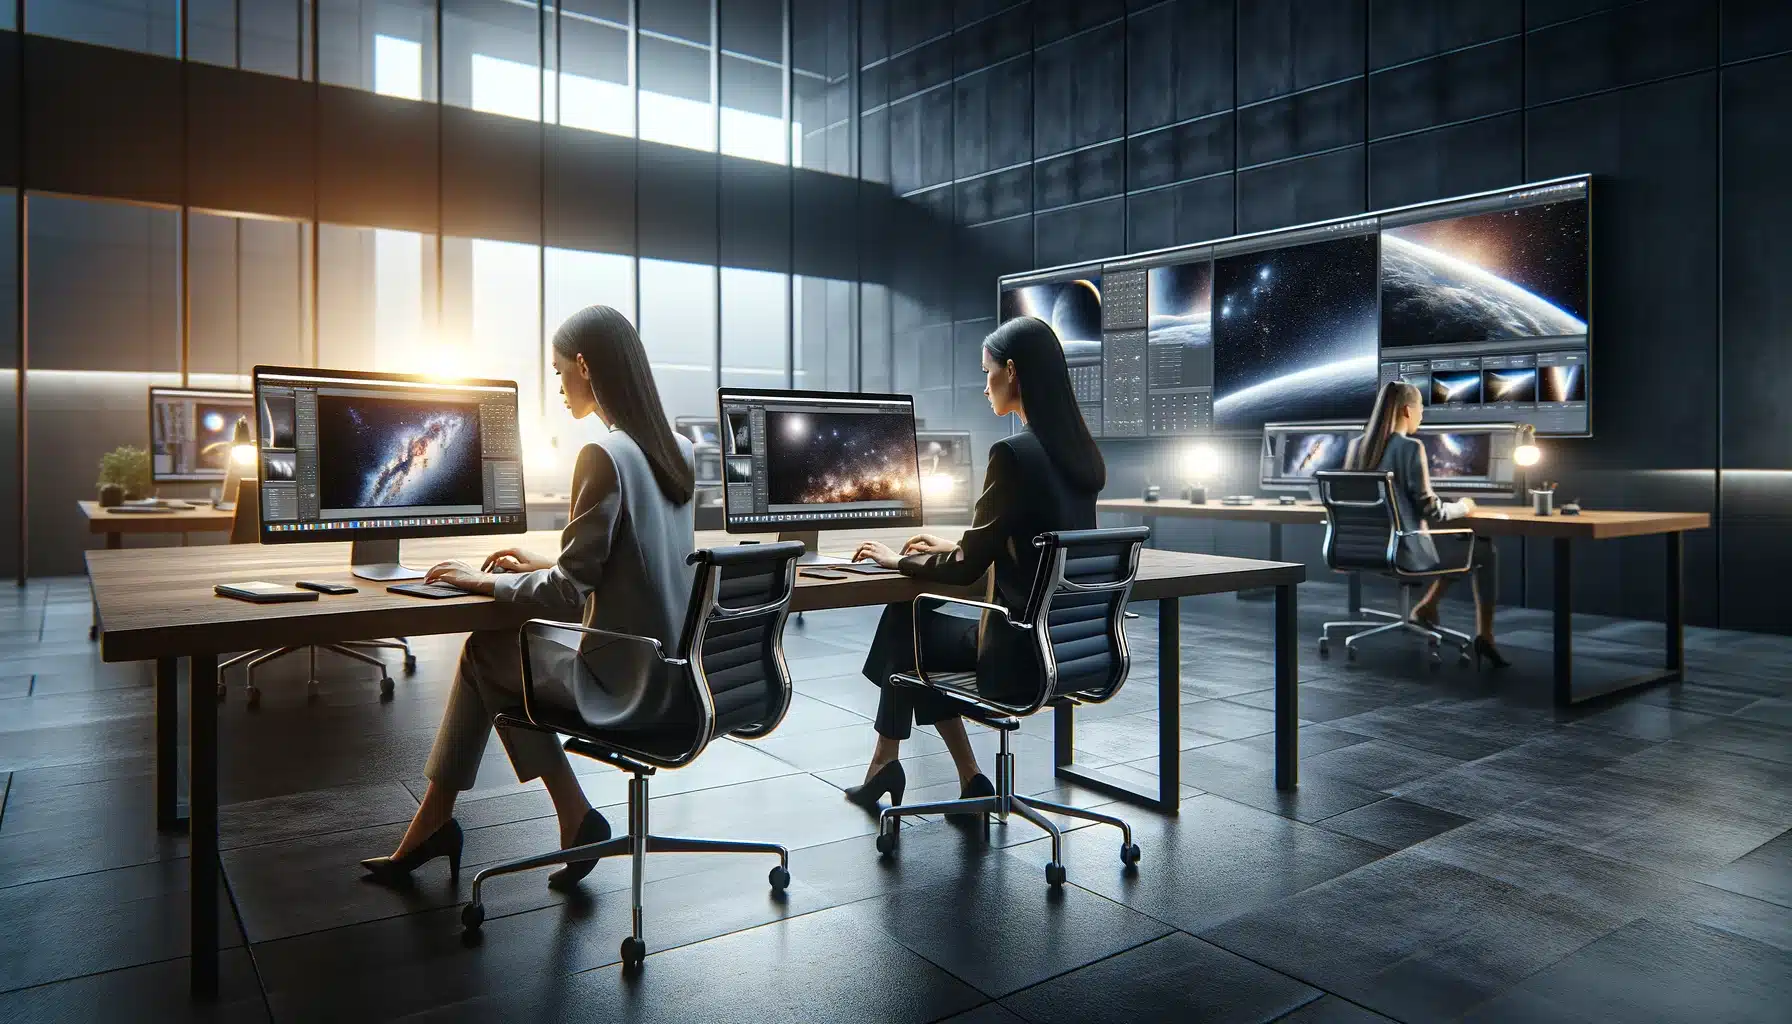 Two professional women edite astro images on laptops in a modern office